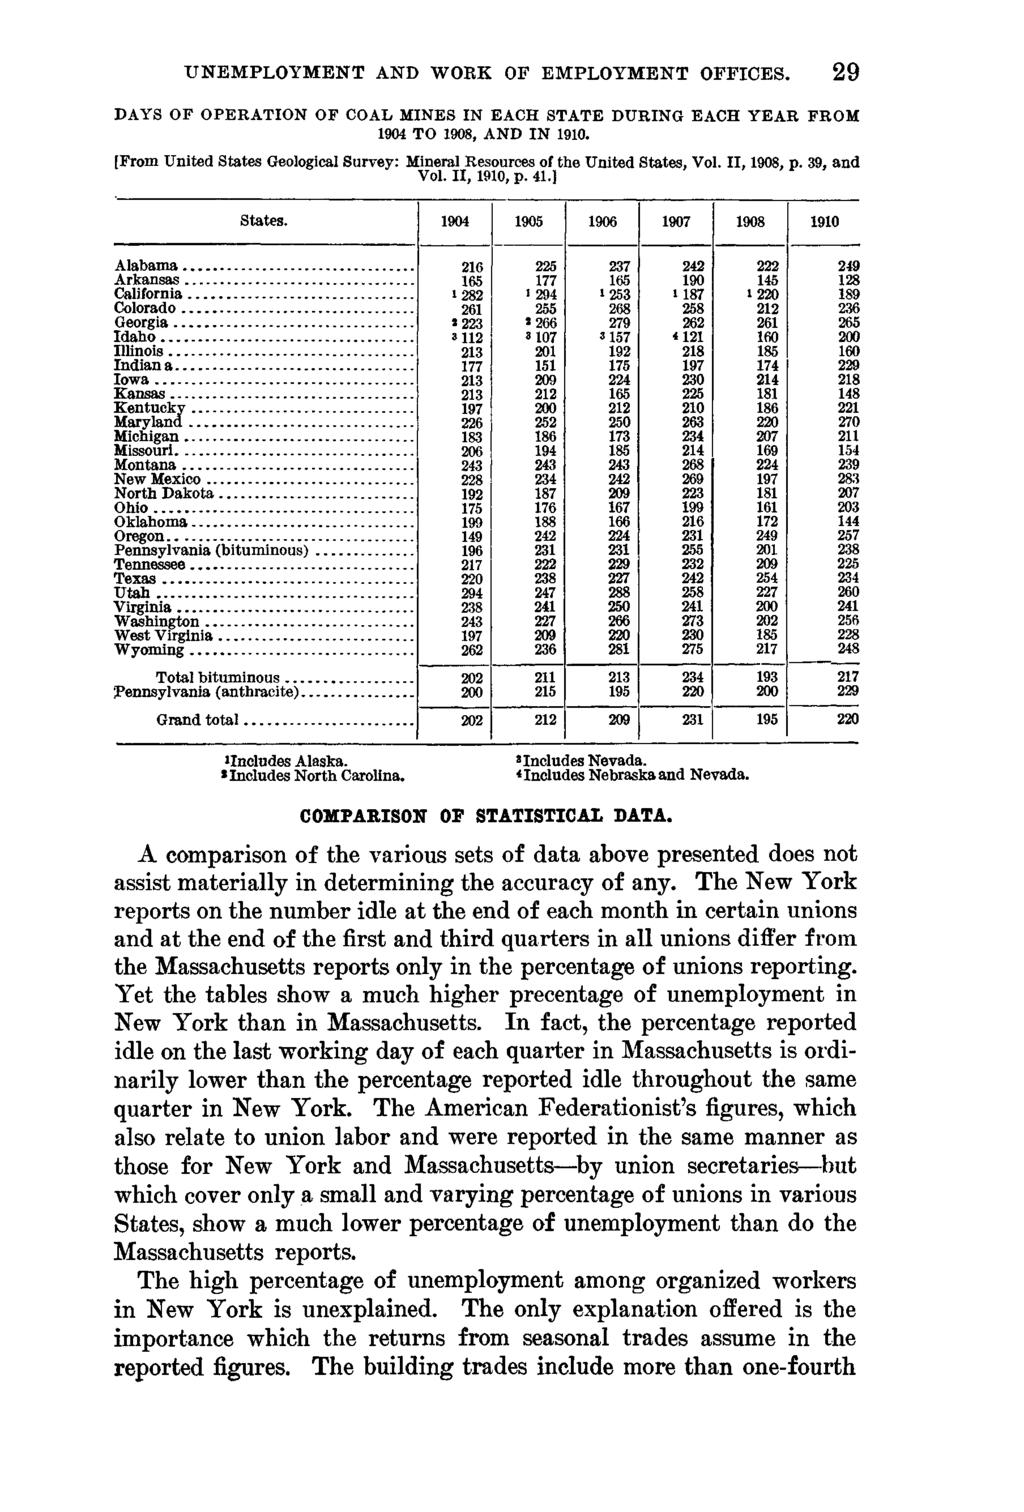 UNEMPLOYMENT AND WORK OF EMPLOYMENT OFFICES. 29 DAYS OF OPERATION OF COAL MINES IN EACH STATE DURING EACH YEAR FROM 1904 TO 1908, AND IN 1910.